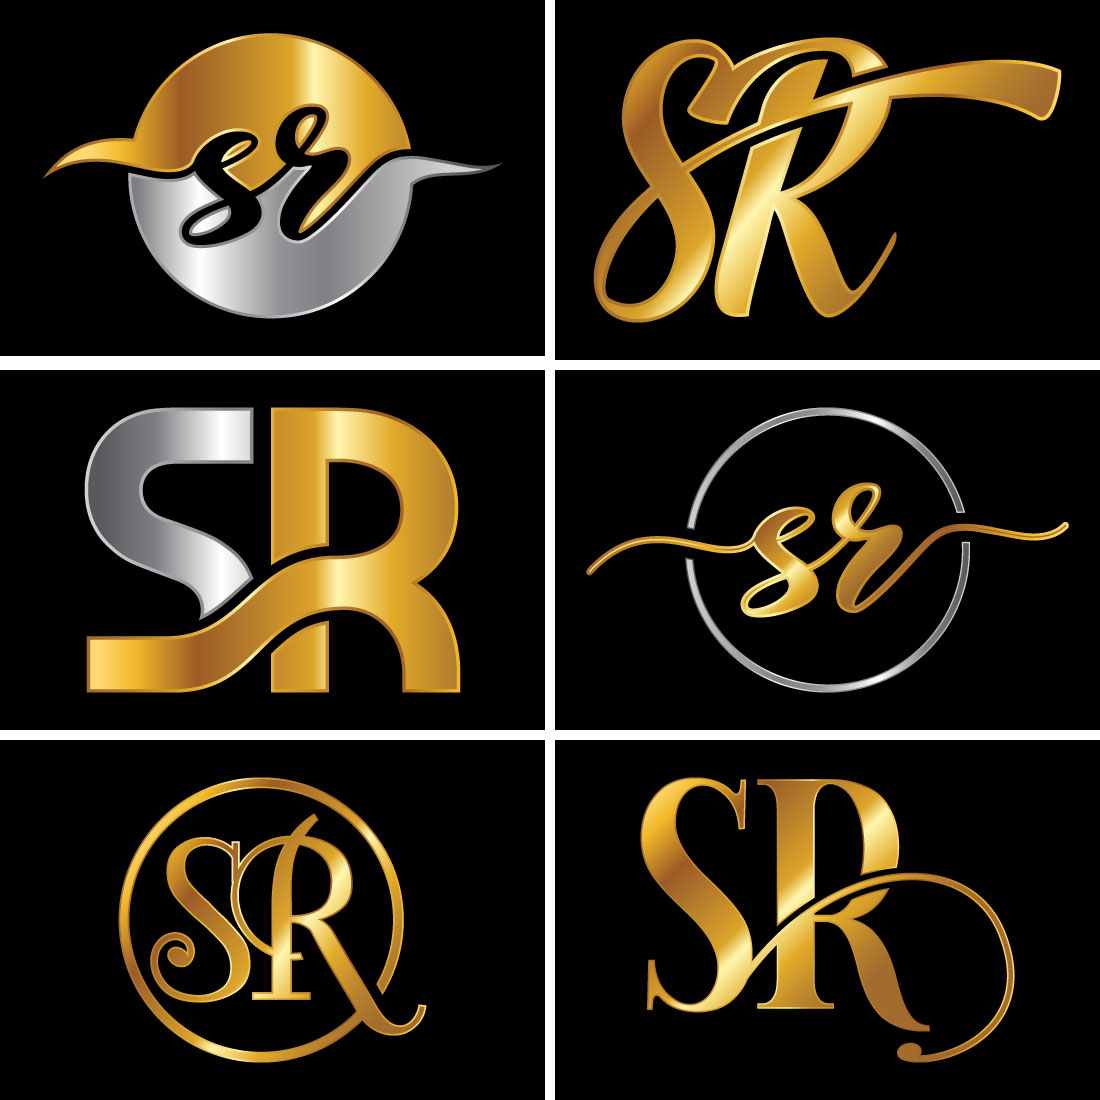 Initial Letter S R Logo Design Vector Template Graphic Alphabet Symbol For Corporate Business Identity cover image.